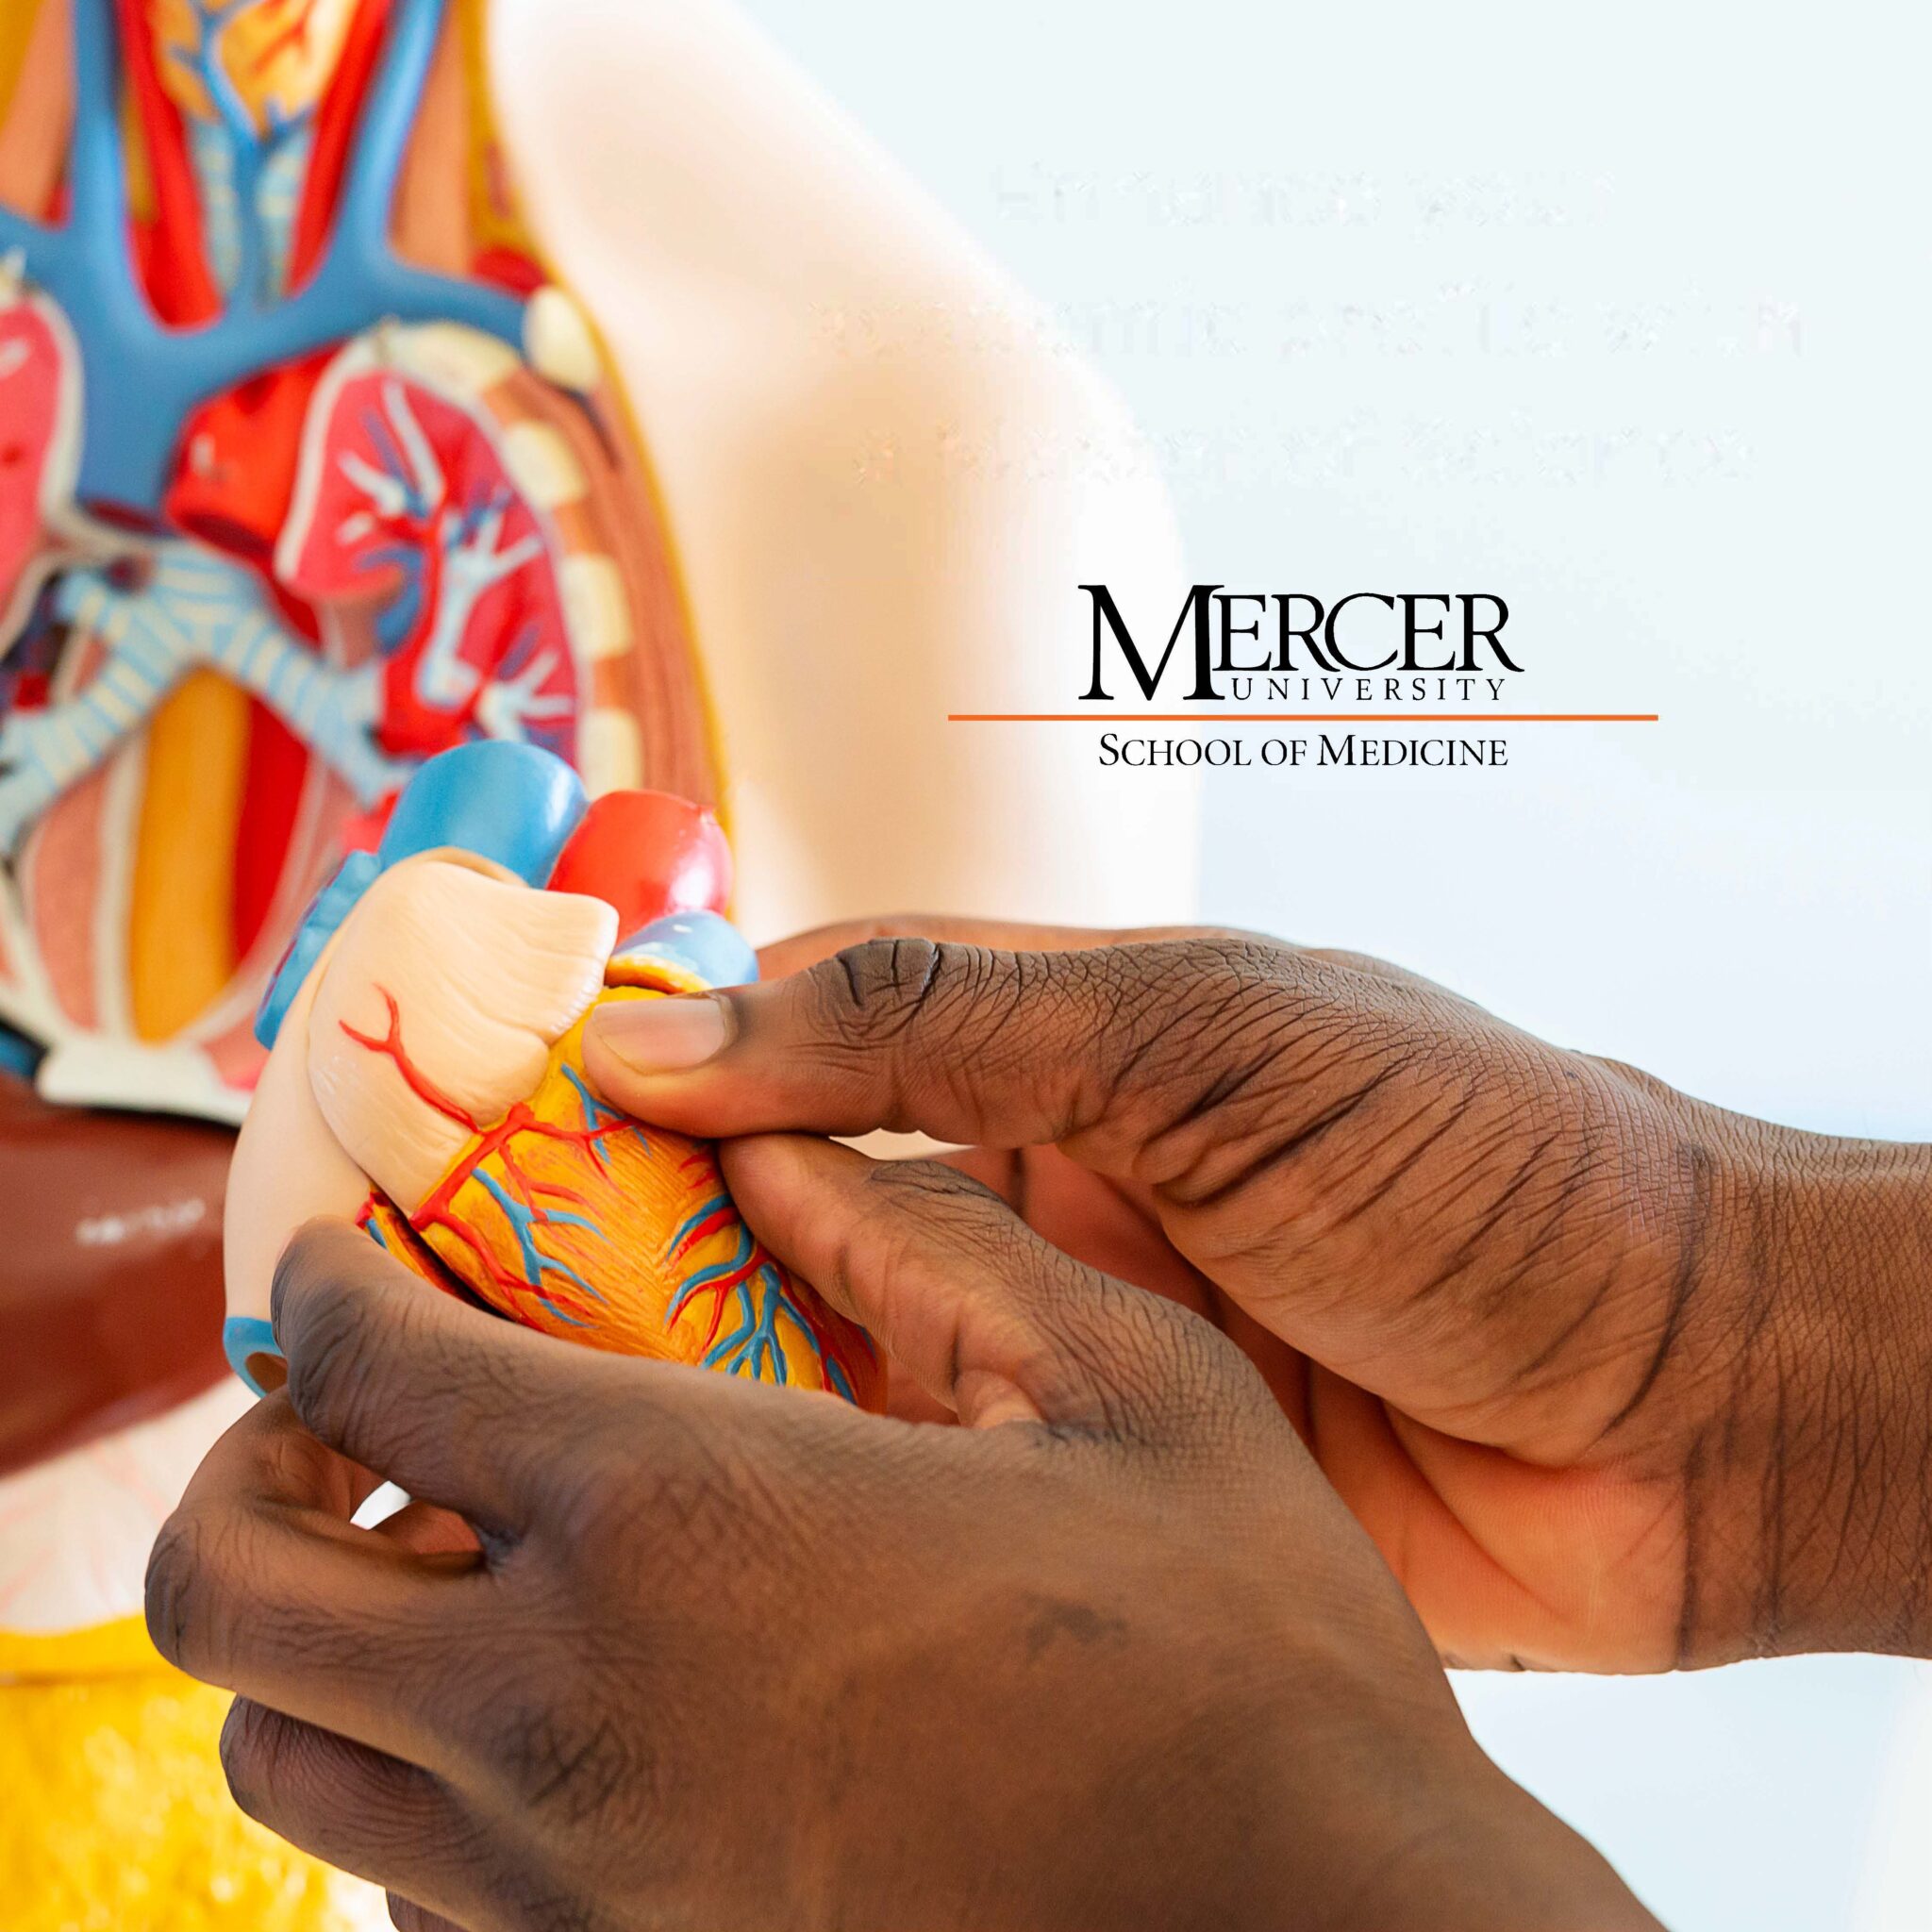 A person's hands are holding a model of a human heart in front of a larger, partially visible anatomical model displaying various internal organs. The visible text reads, "Mercer University School of Medicine." The background is light-colored, highlighting the detailed, colorful aspects of the models.